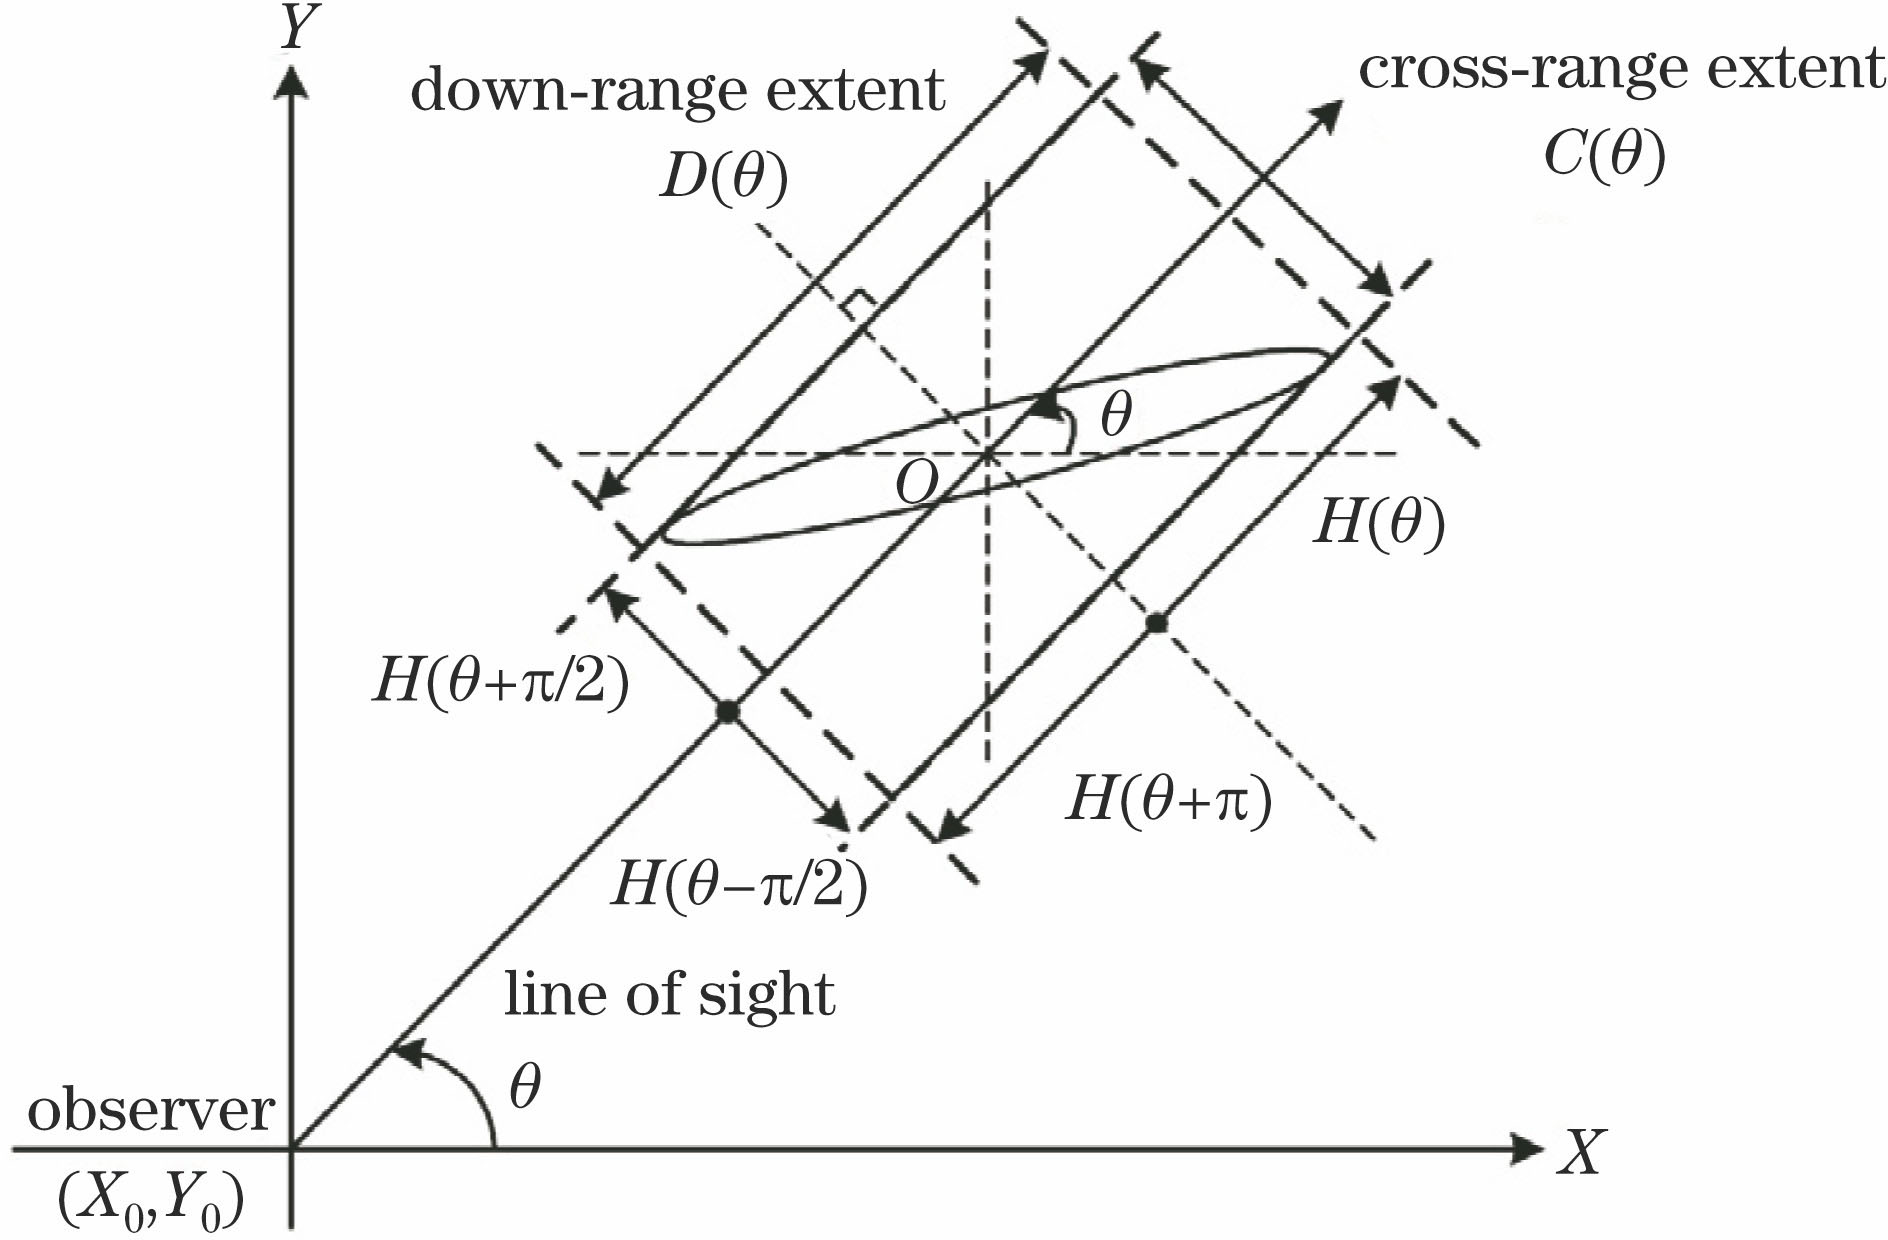 Extended object and its range extent measurement